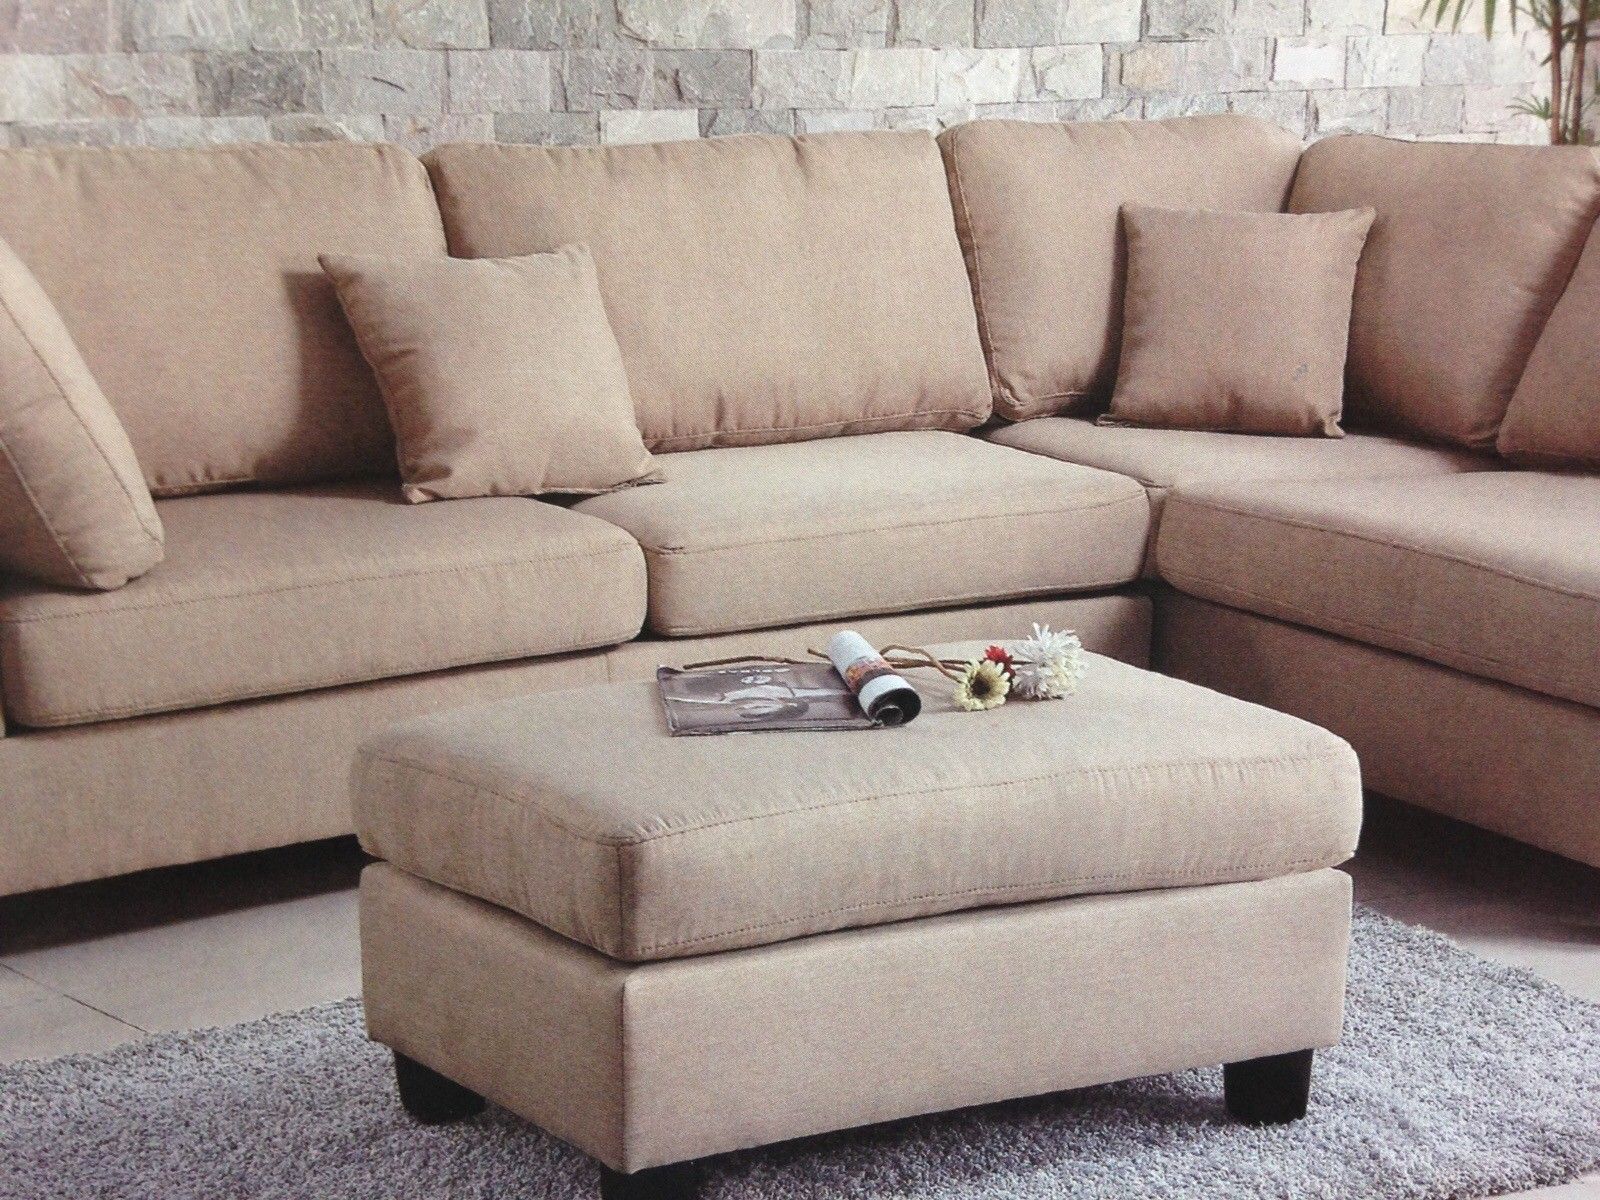 Sofa/chaise sectional set. New